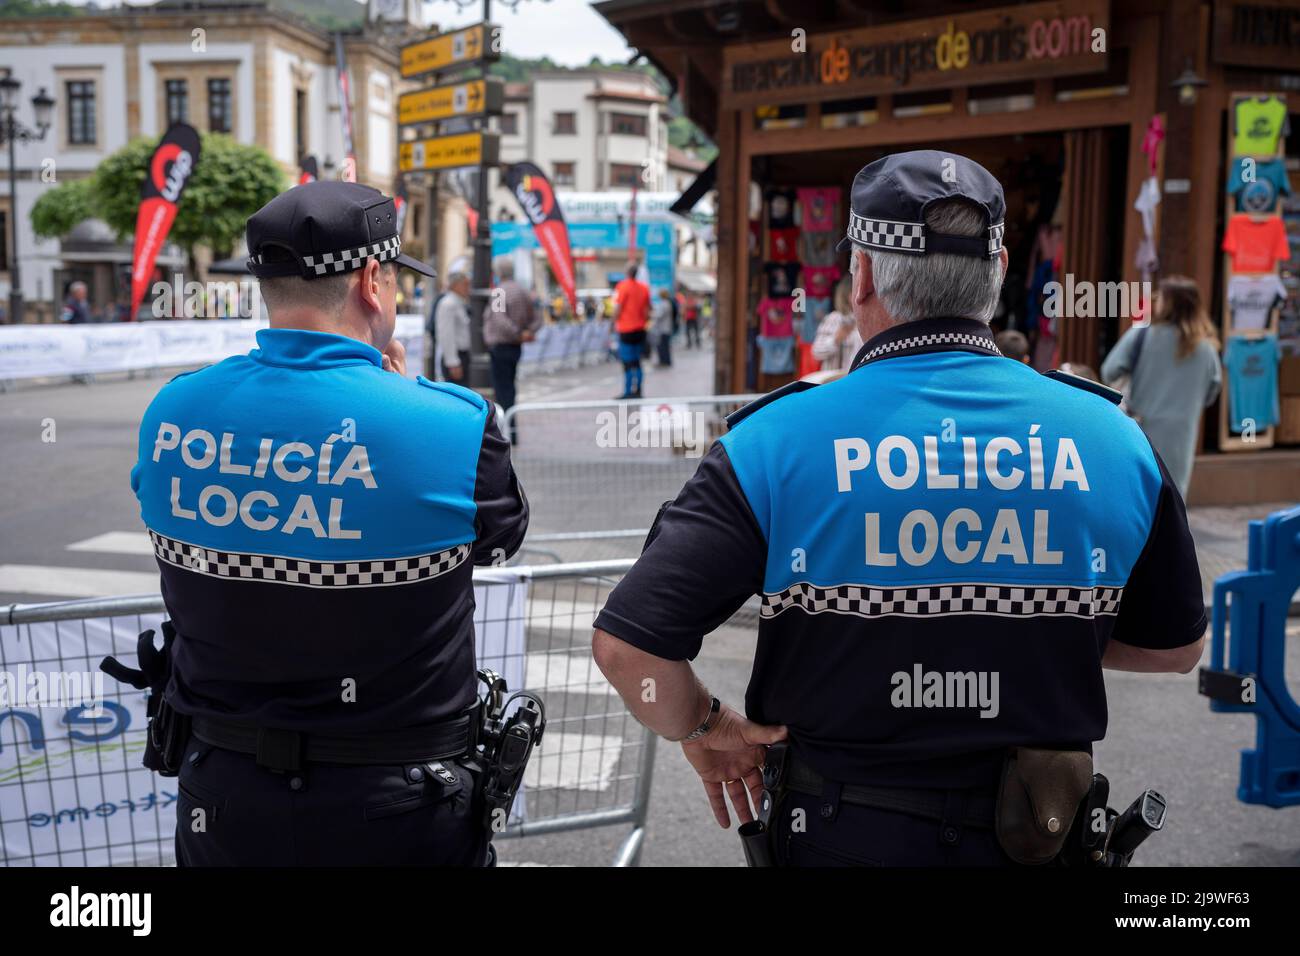 Two local police officers (Policia) provide security during a Spanish trail running event, on 14th May 2022, in Congas de Onis, Picos Mountains, Asturias, Spain. Stock Photo